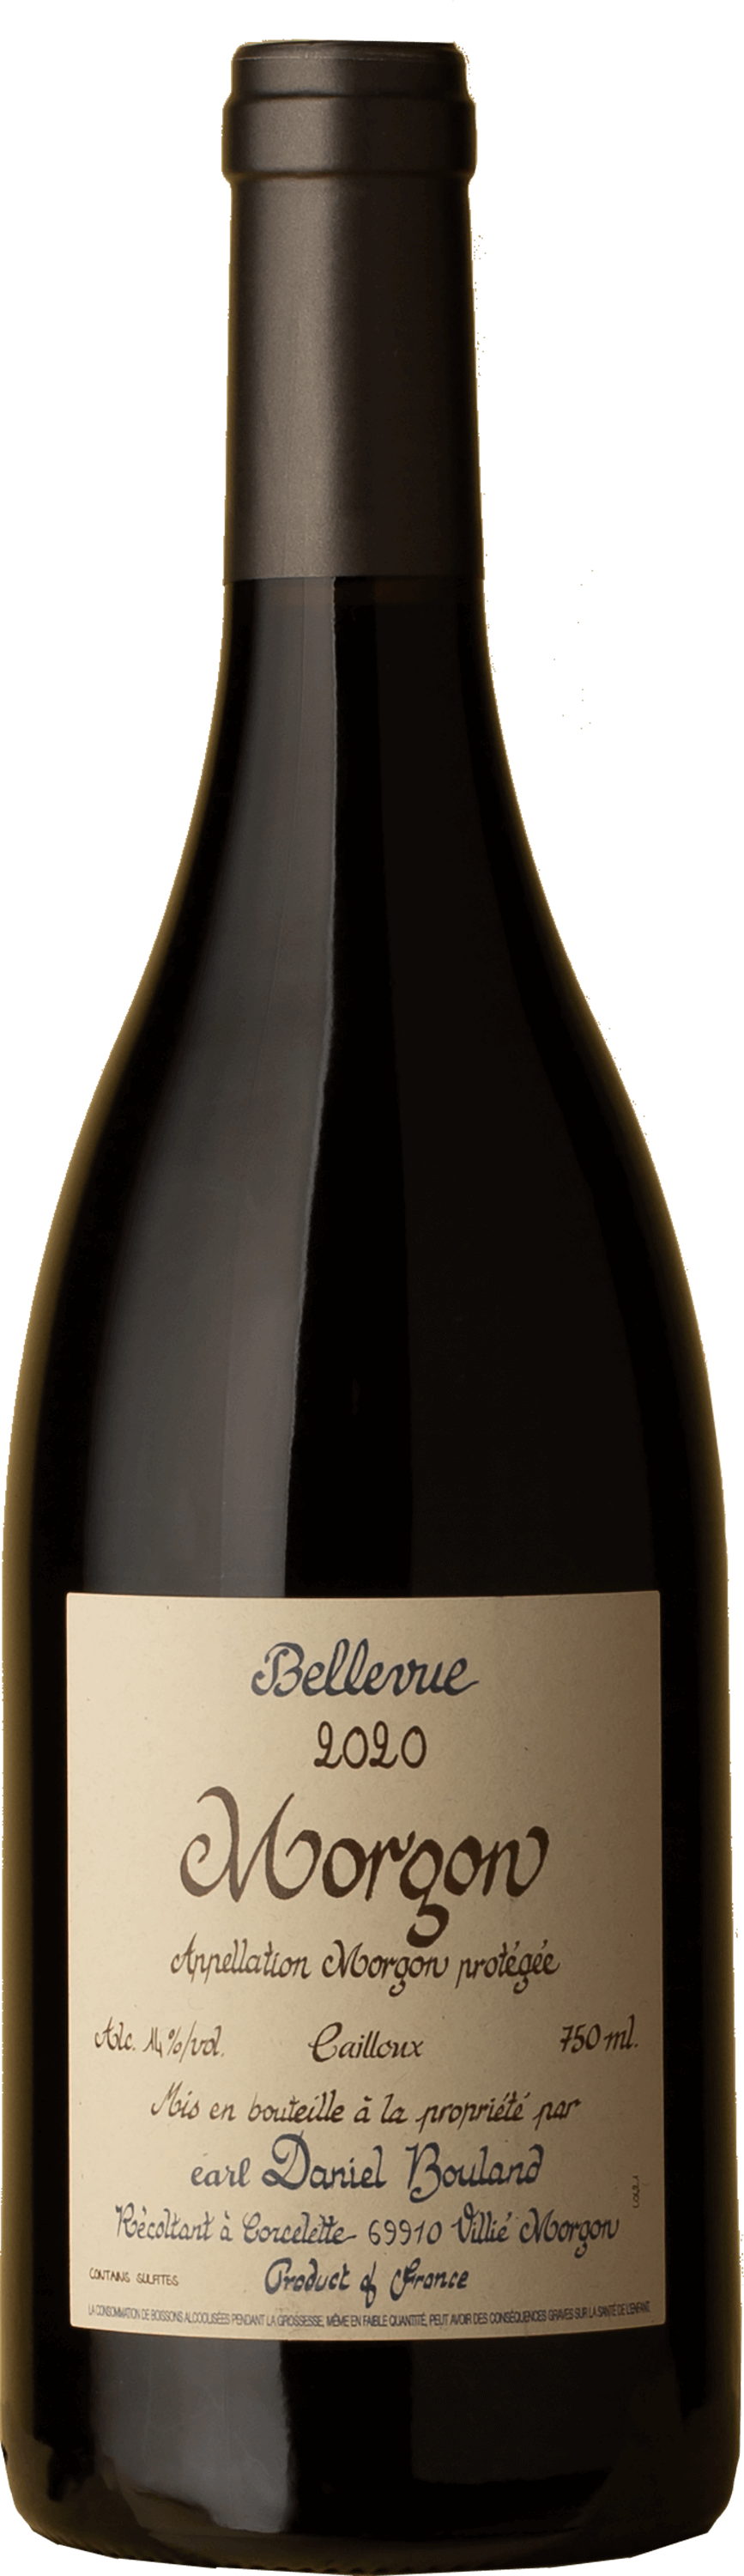 Daniel Bouland - Morgon Bellevue Cailloux Gamay 2020 Red Wine